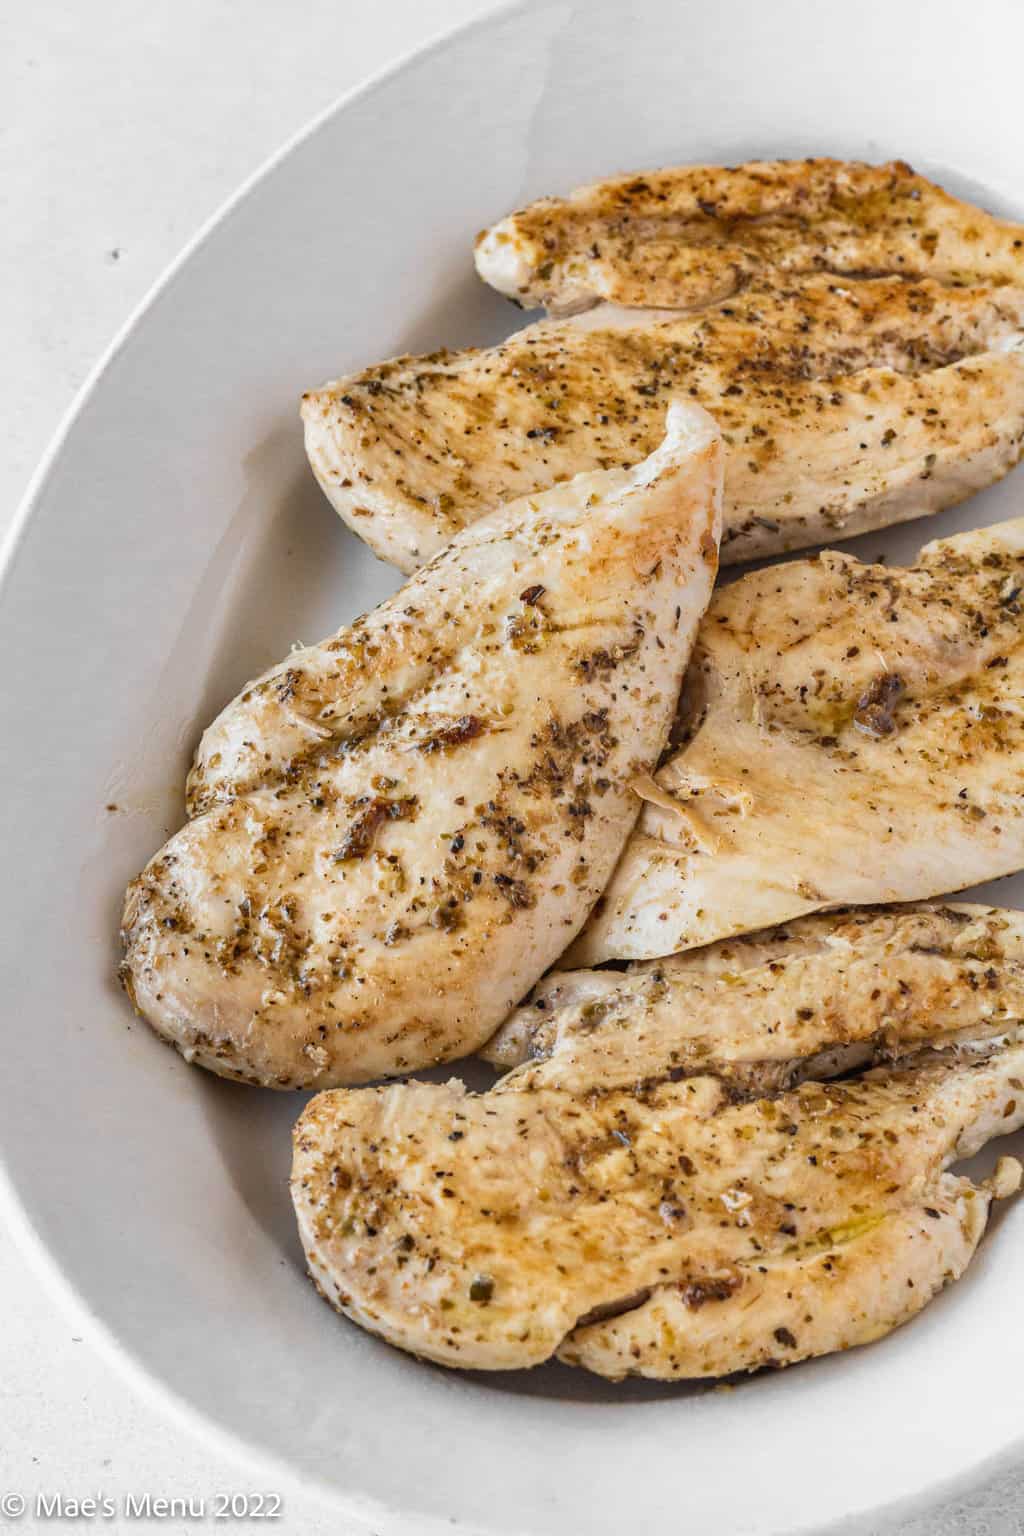 Sauteed chicken breasts on a white plate.